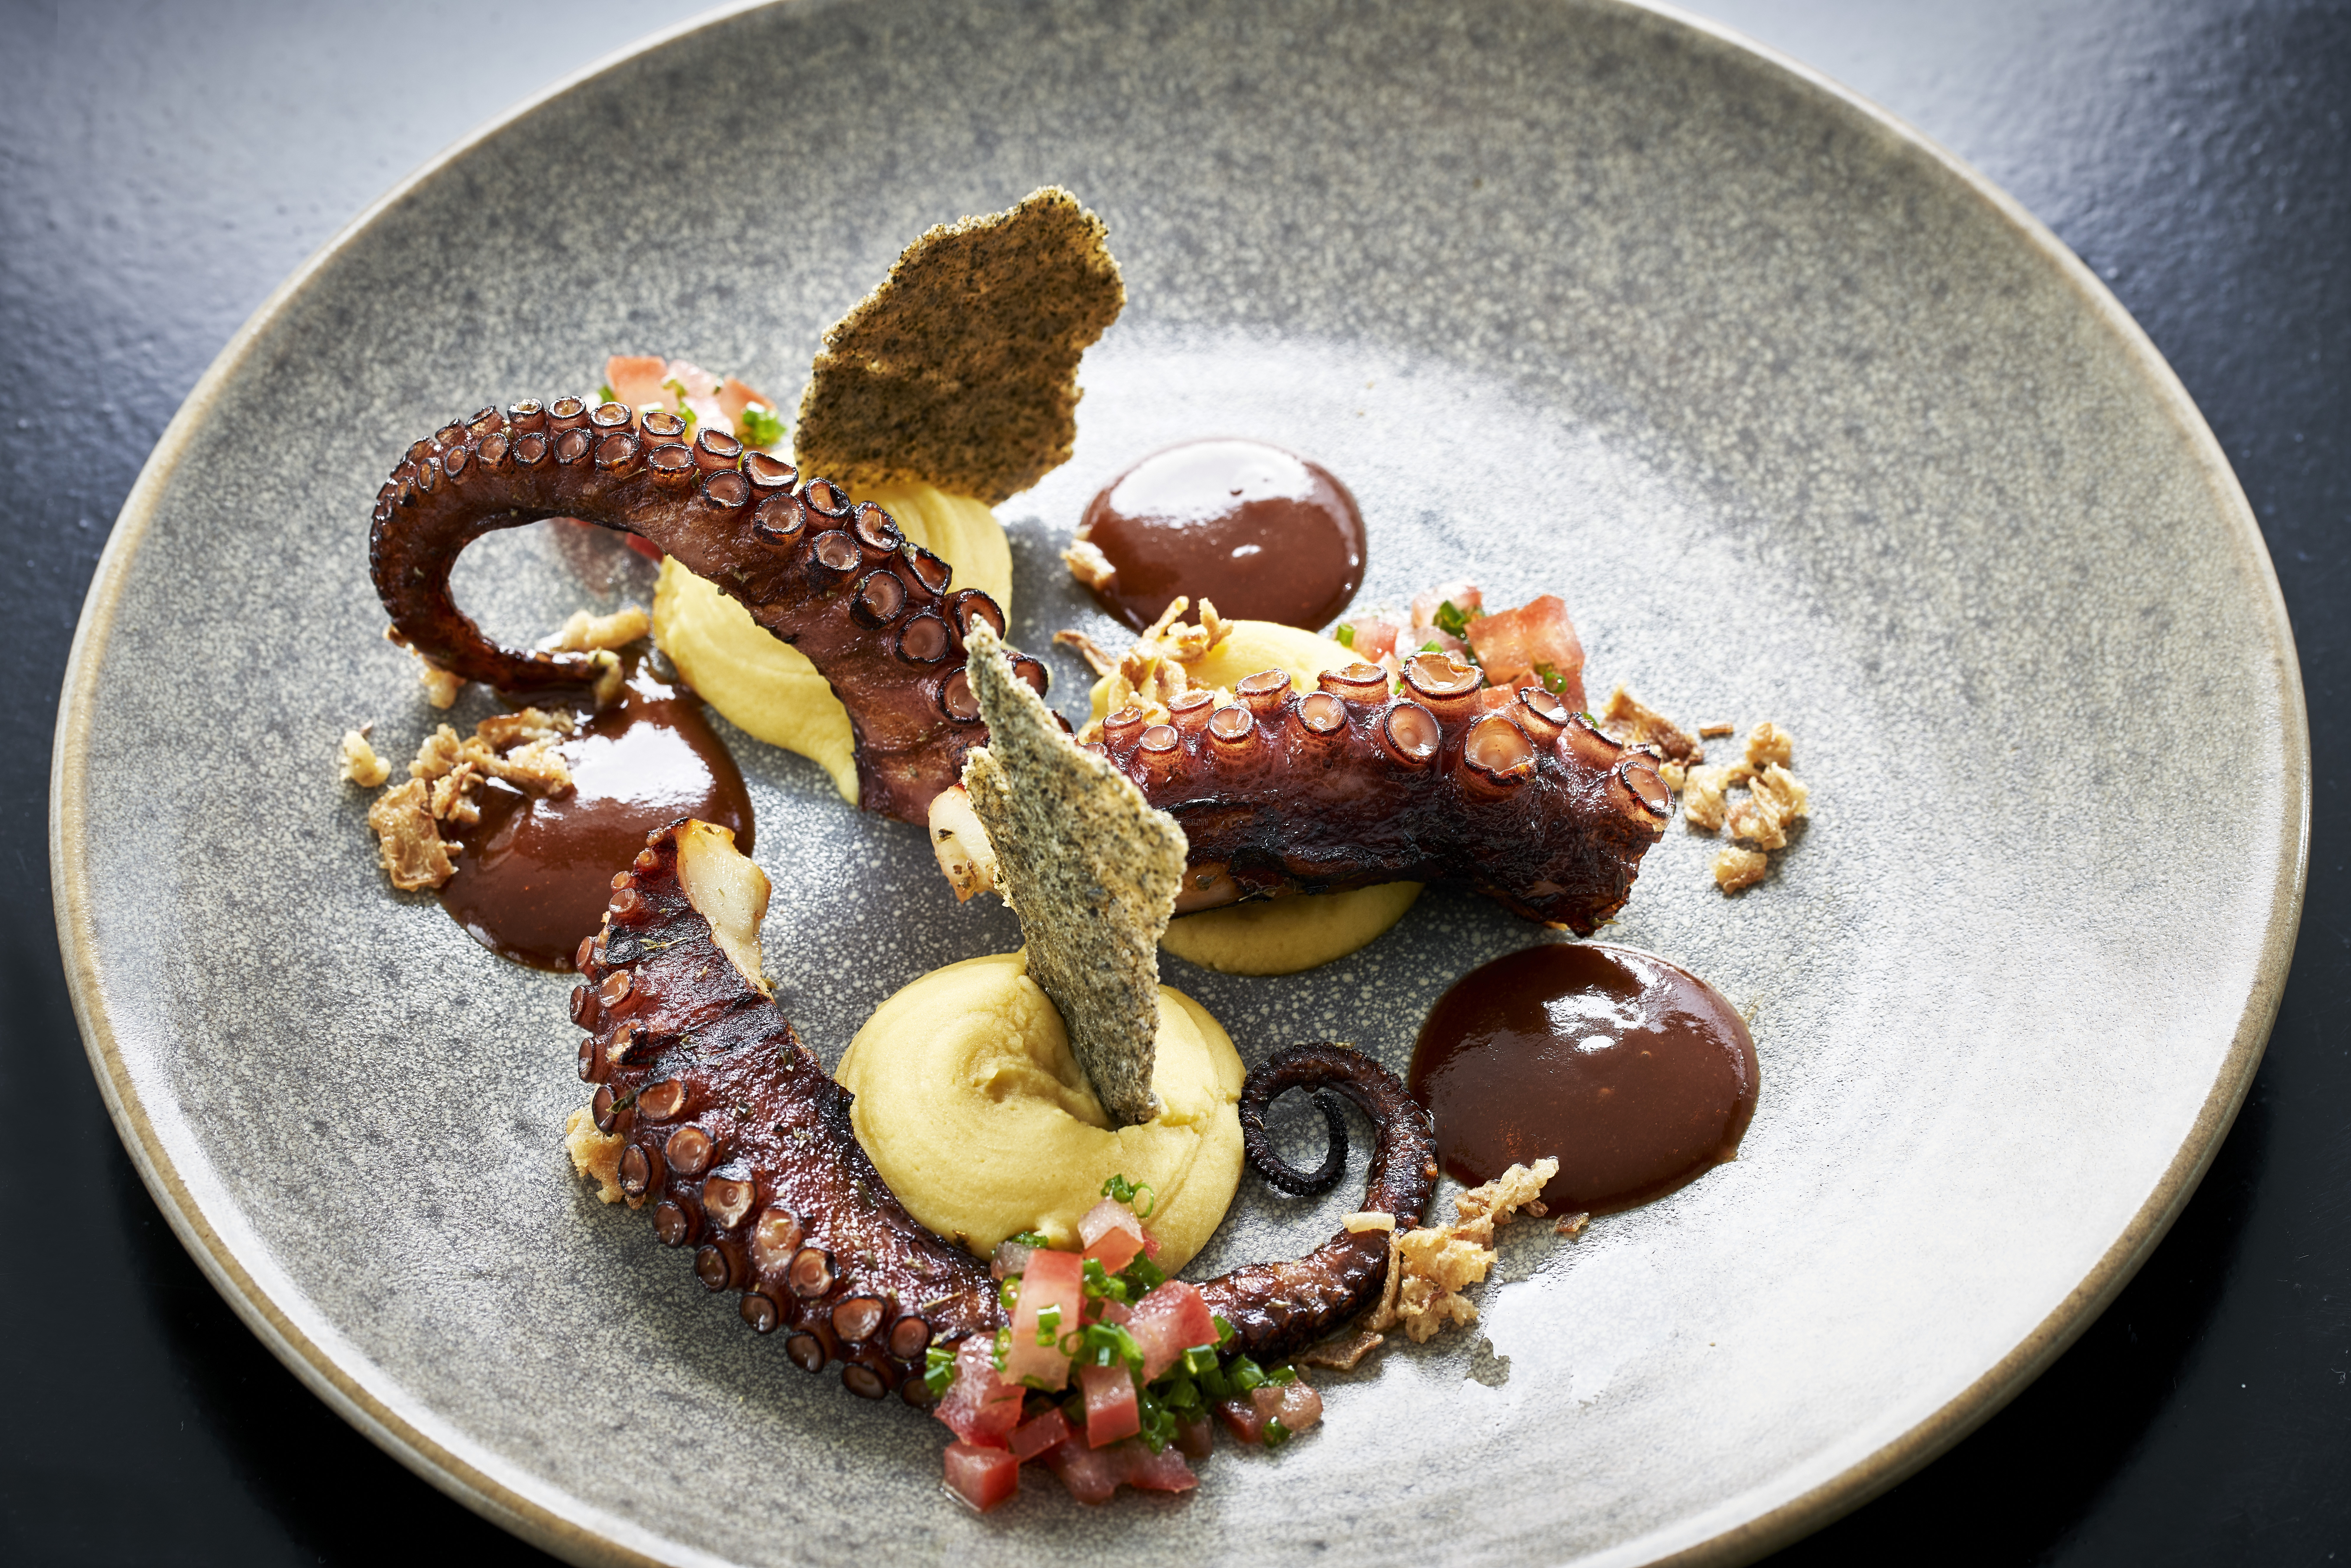 Grilled octopus in barbeque sauce